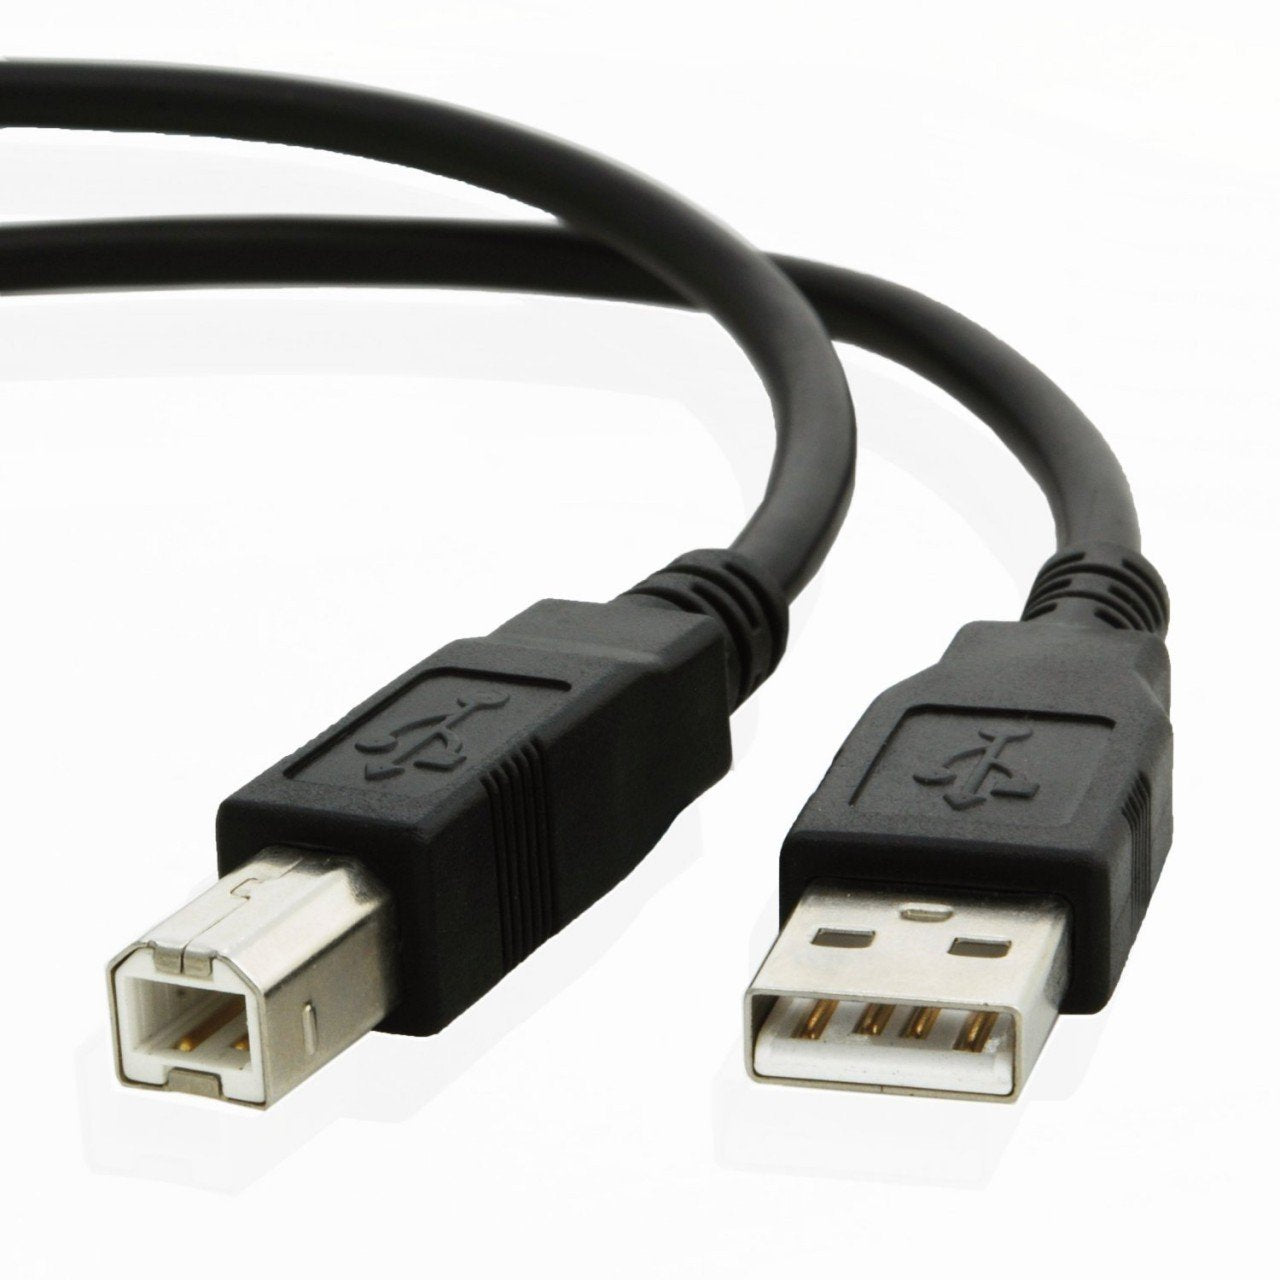 USB cable for Canon IMAGEFORMULA DR-M1060